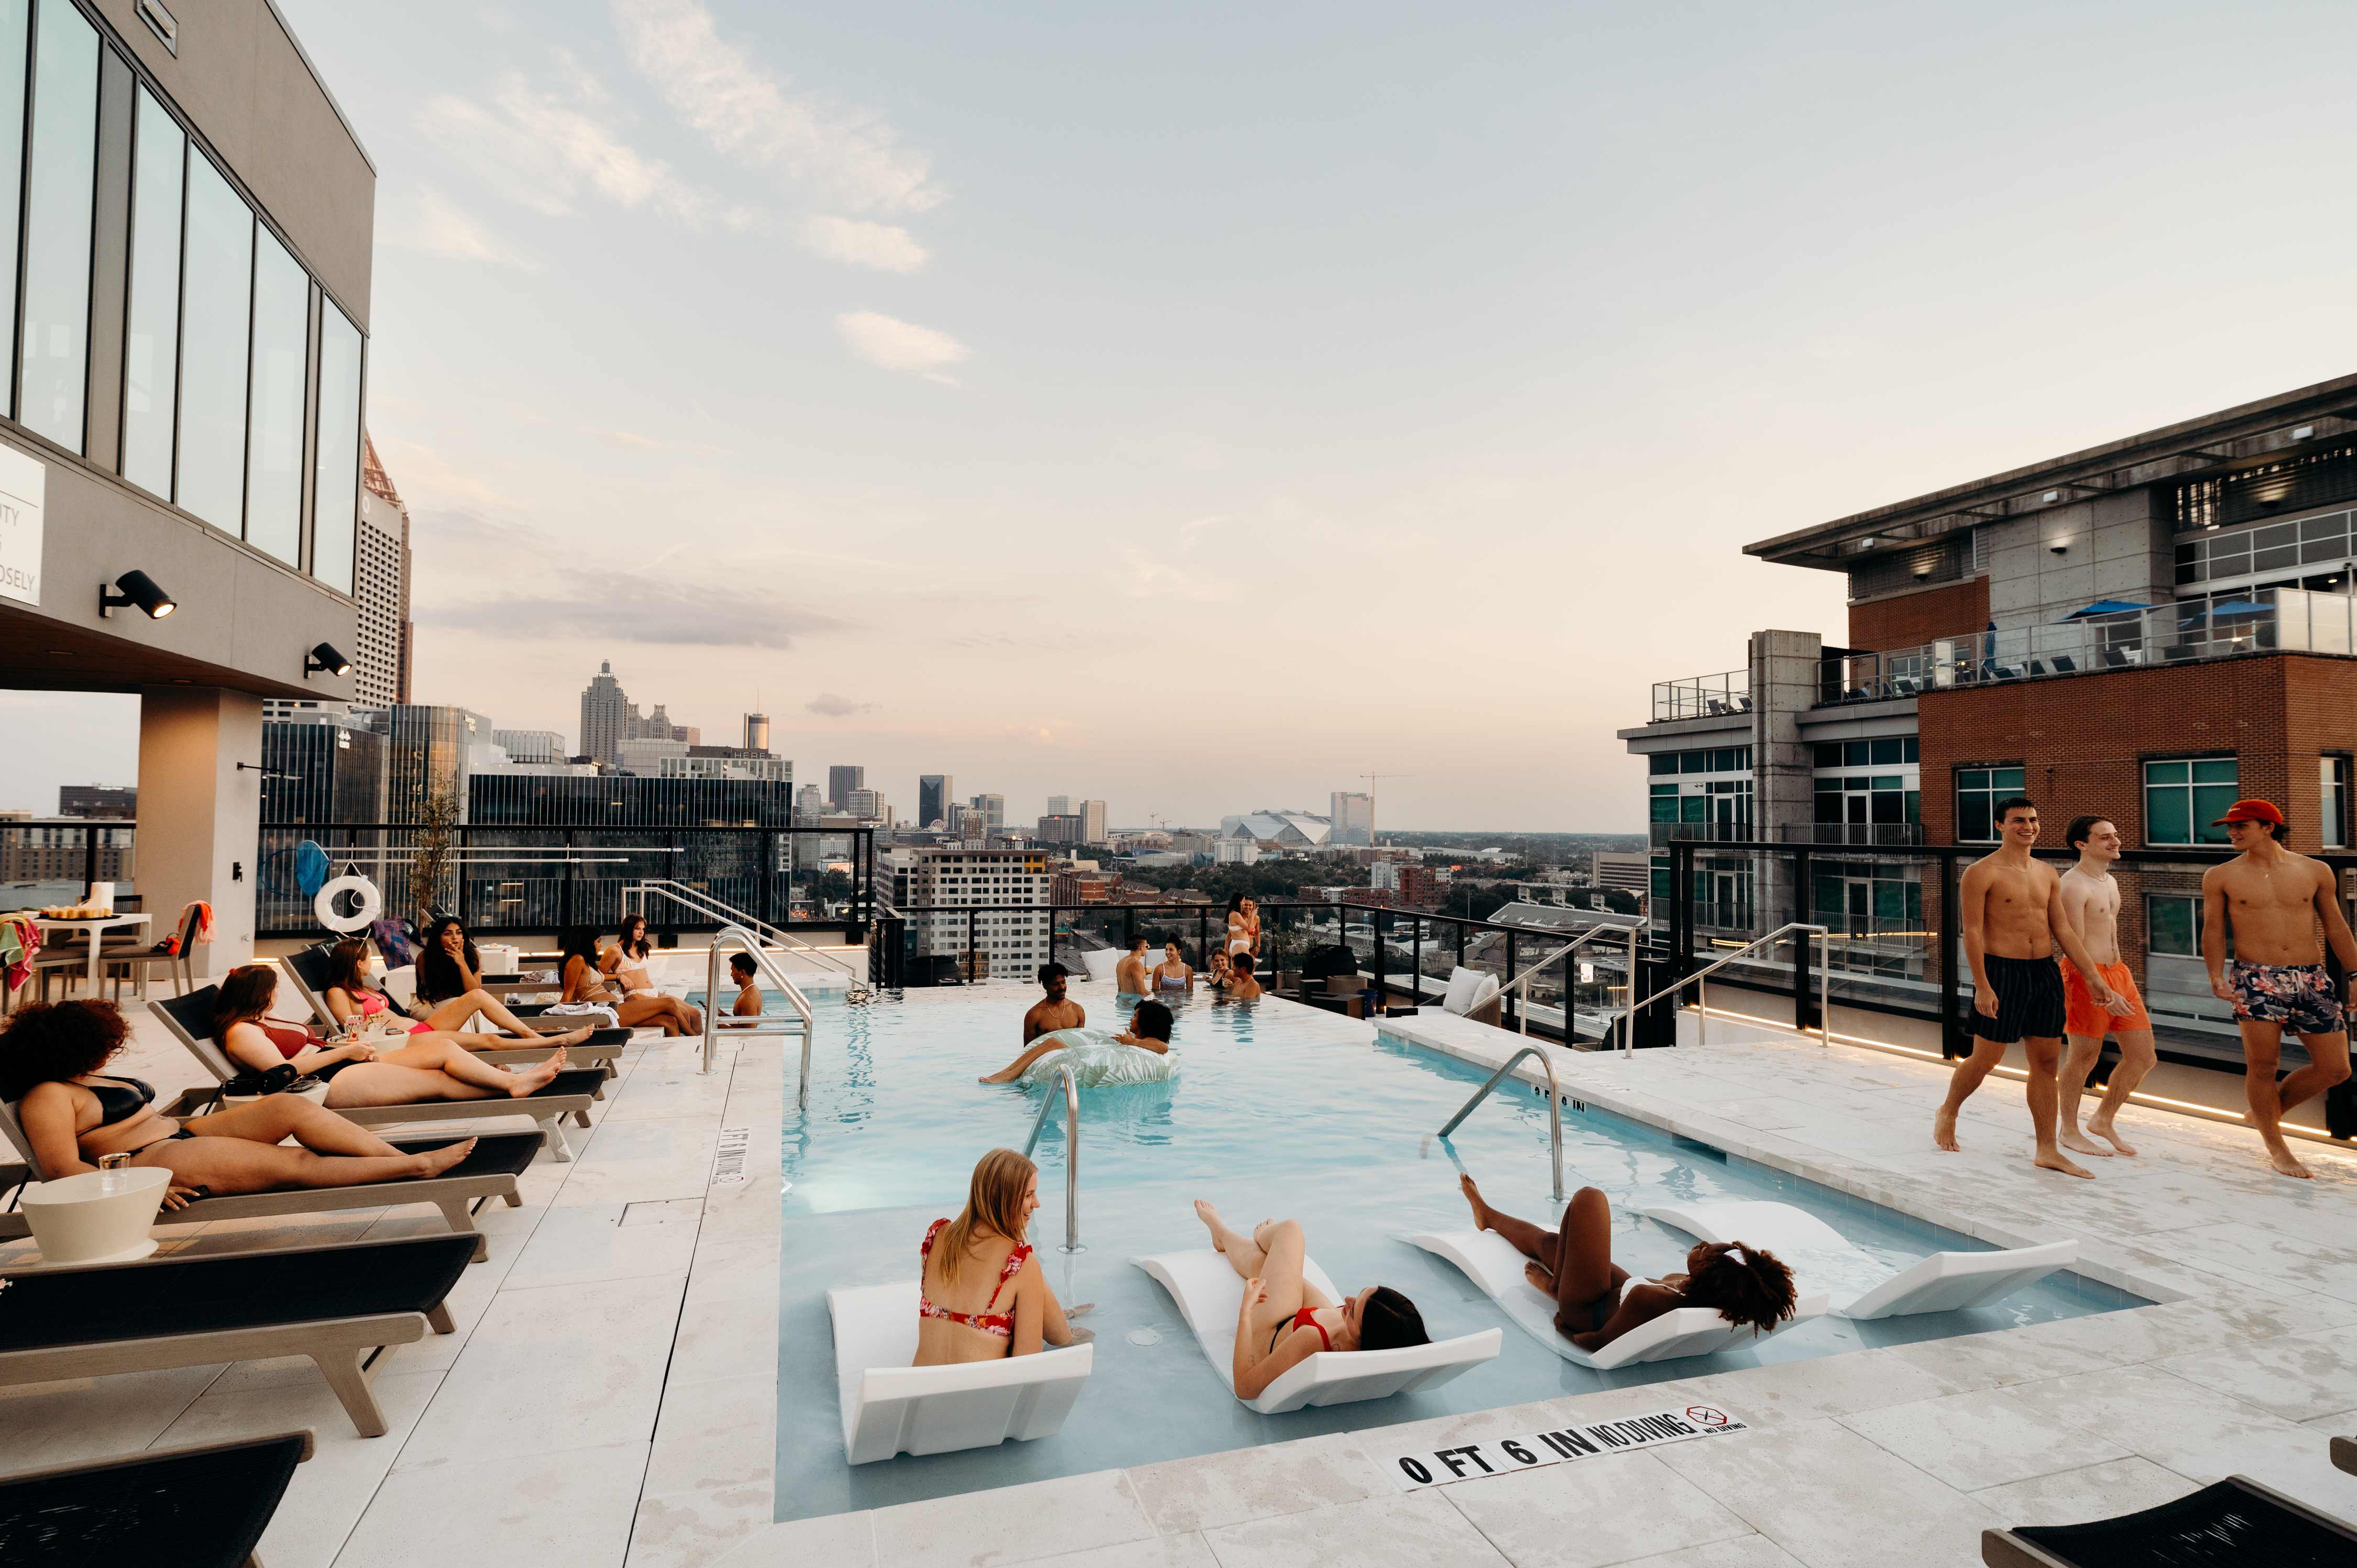 Whistler's rooftop pool deck